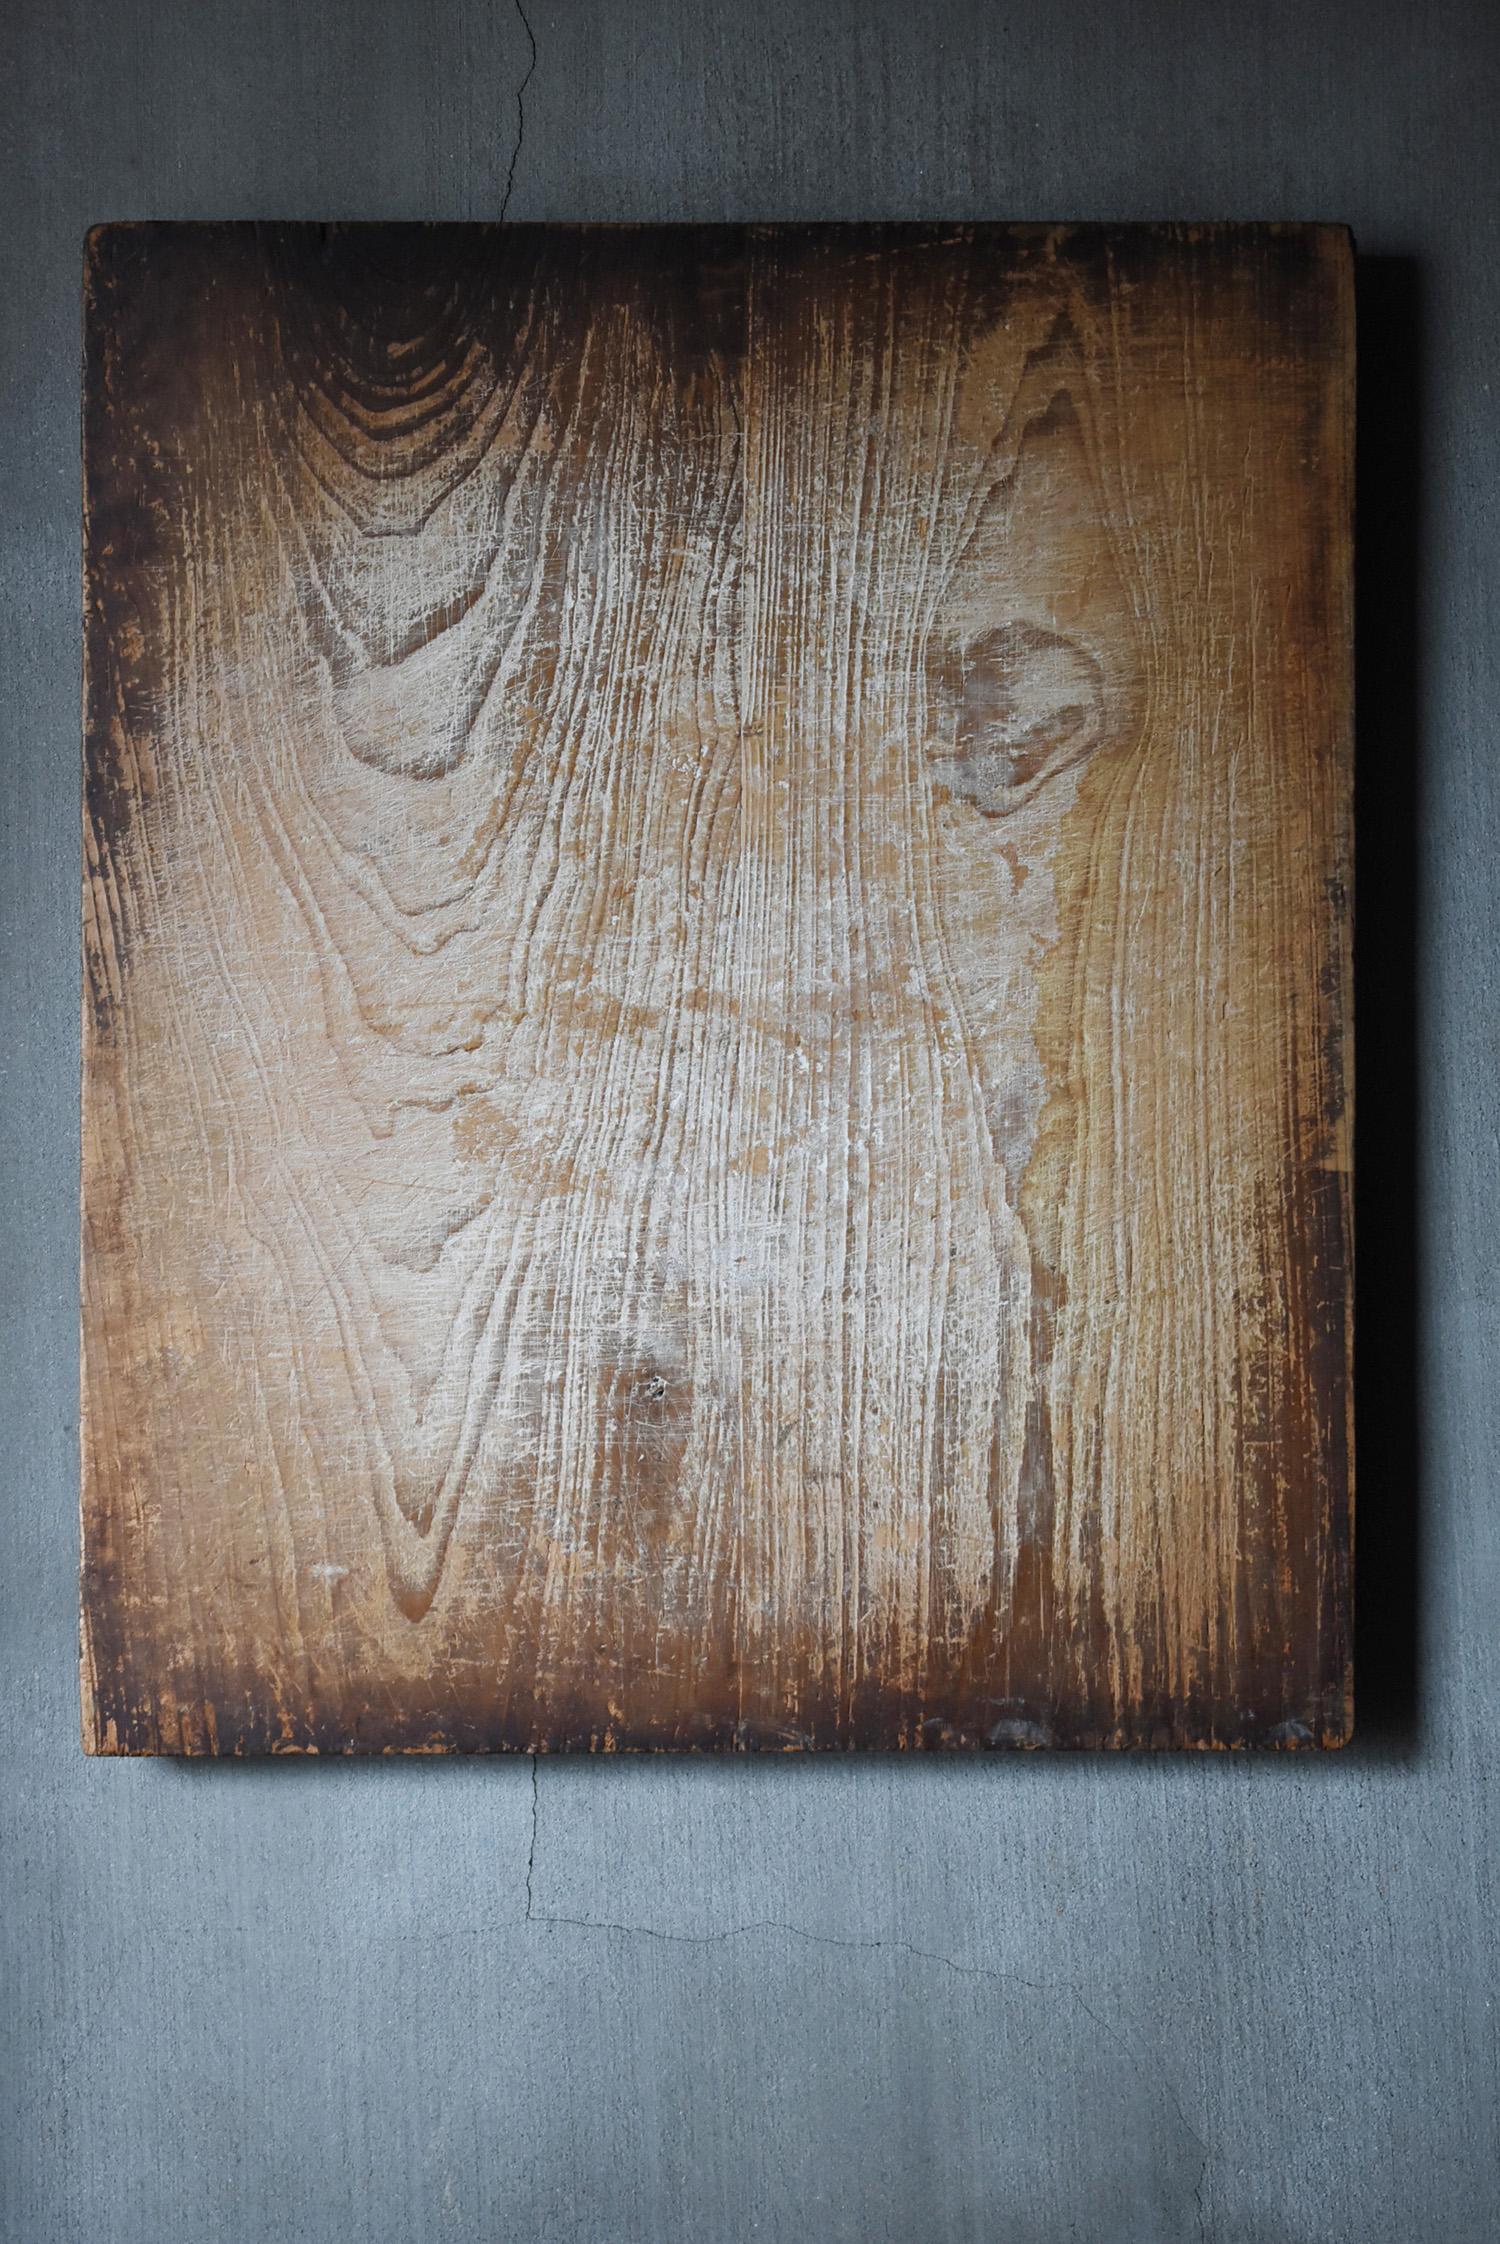 20th Century Japanese Old Wooden Board Mochiita 1860s-1920s/Antique Abstract Art Wabisabi